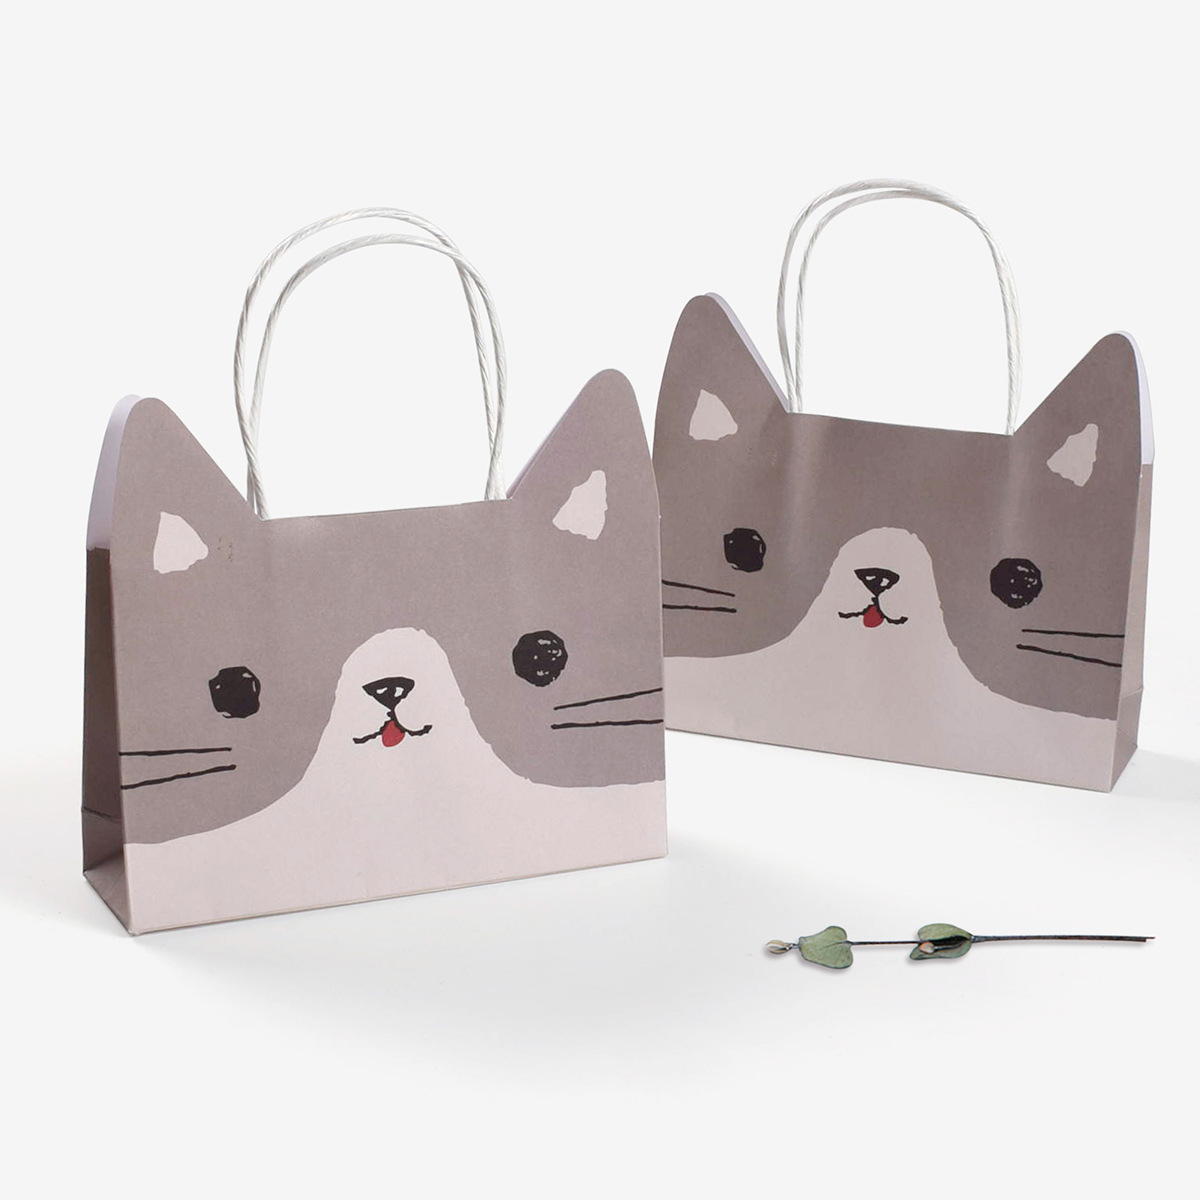 Ins Style in Stock Wholesale New Cartoon Animal Shaped Handbag Candy Food Paper Bag Gift Bag Empty Bag